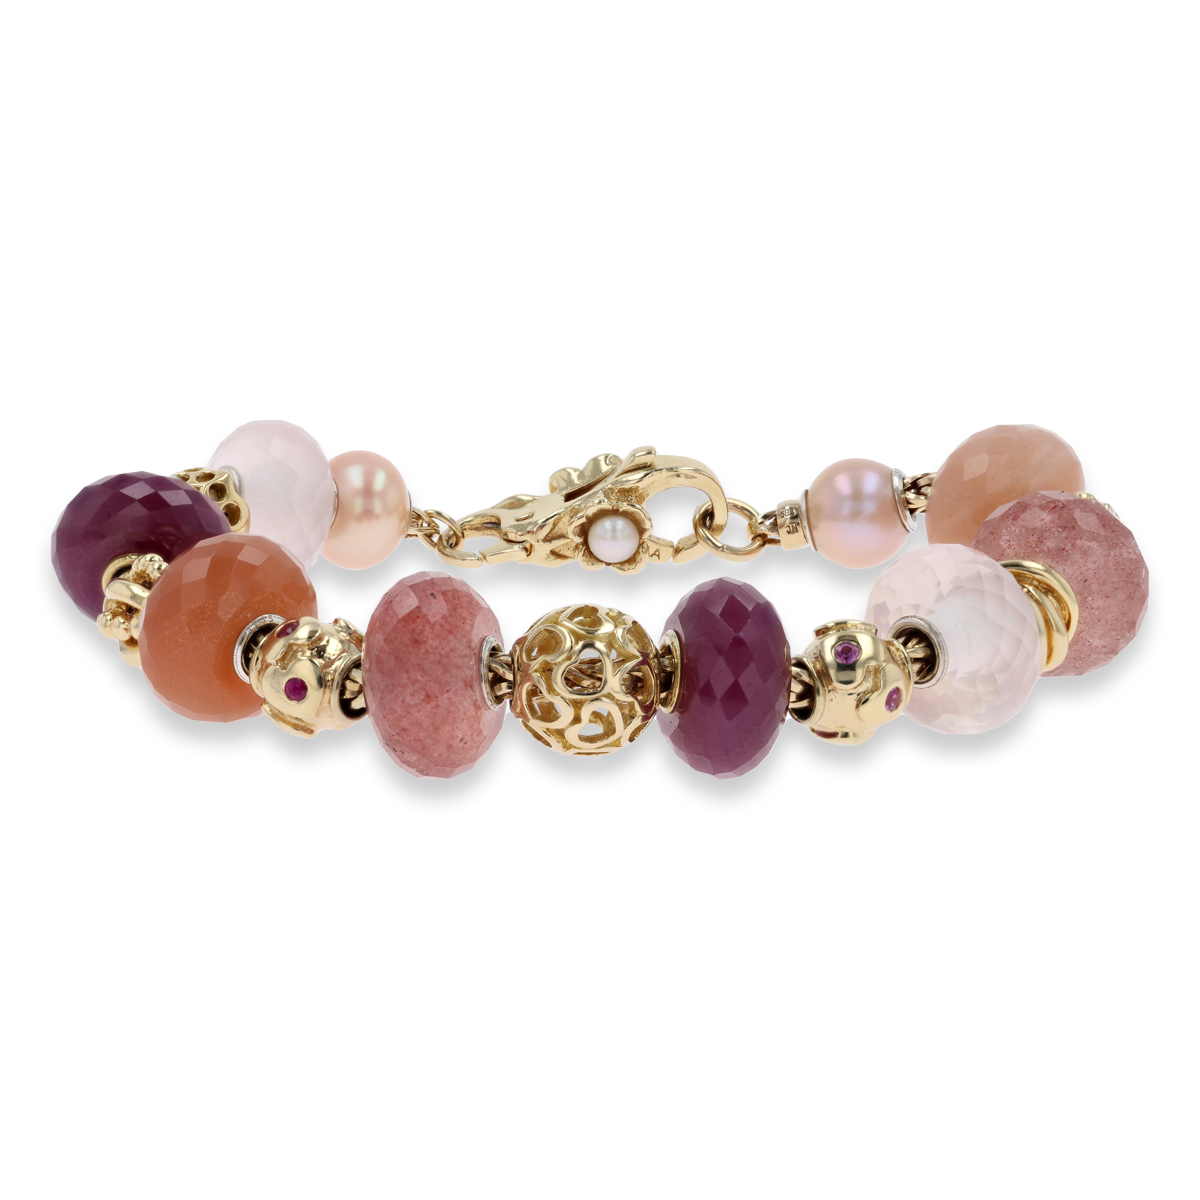 Trollbeads 18ct Yellow Gold Blanket Of Love Bead on Bracelet with Precious Stones